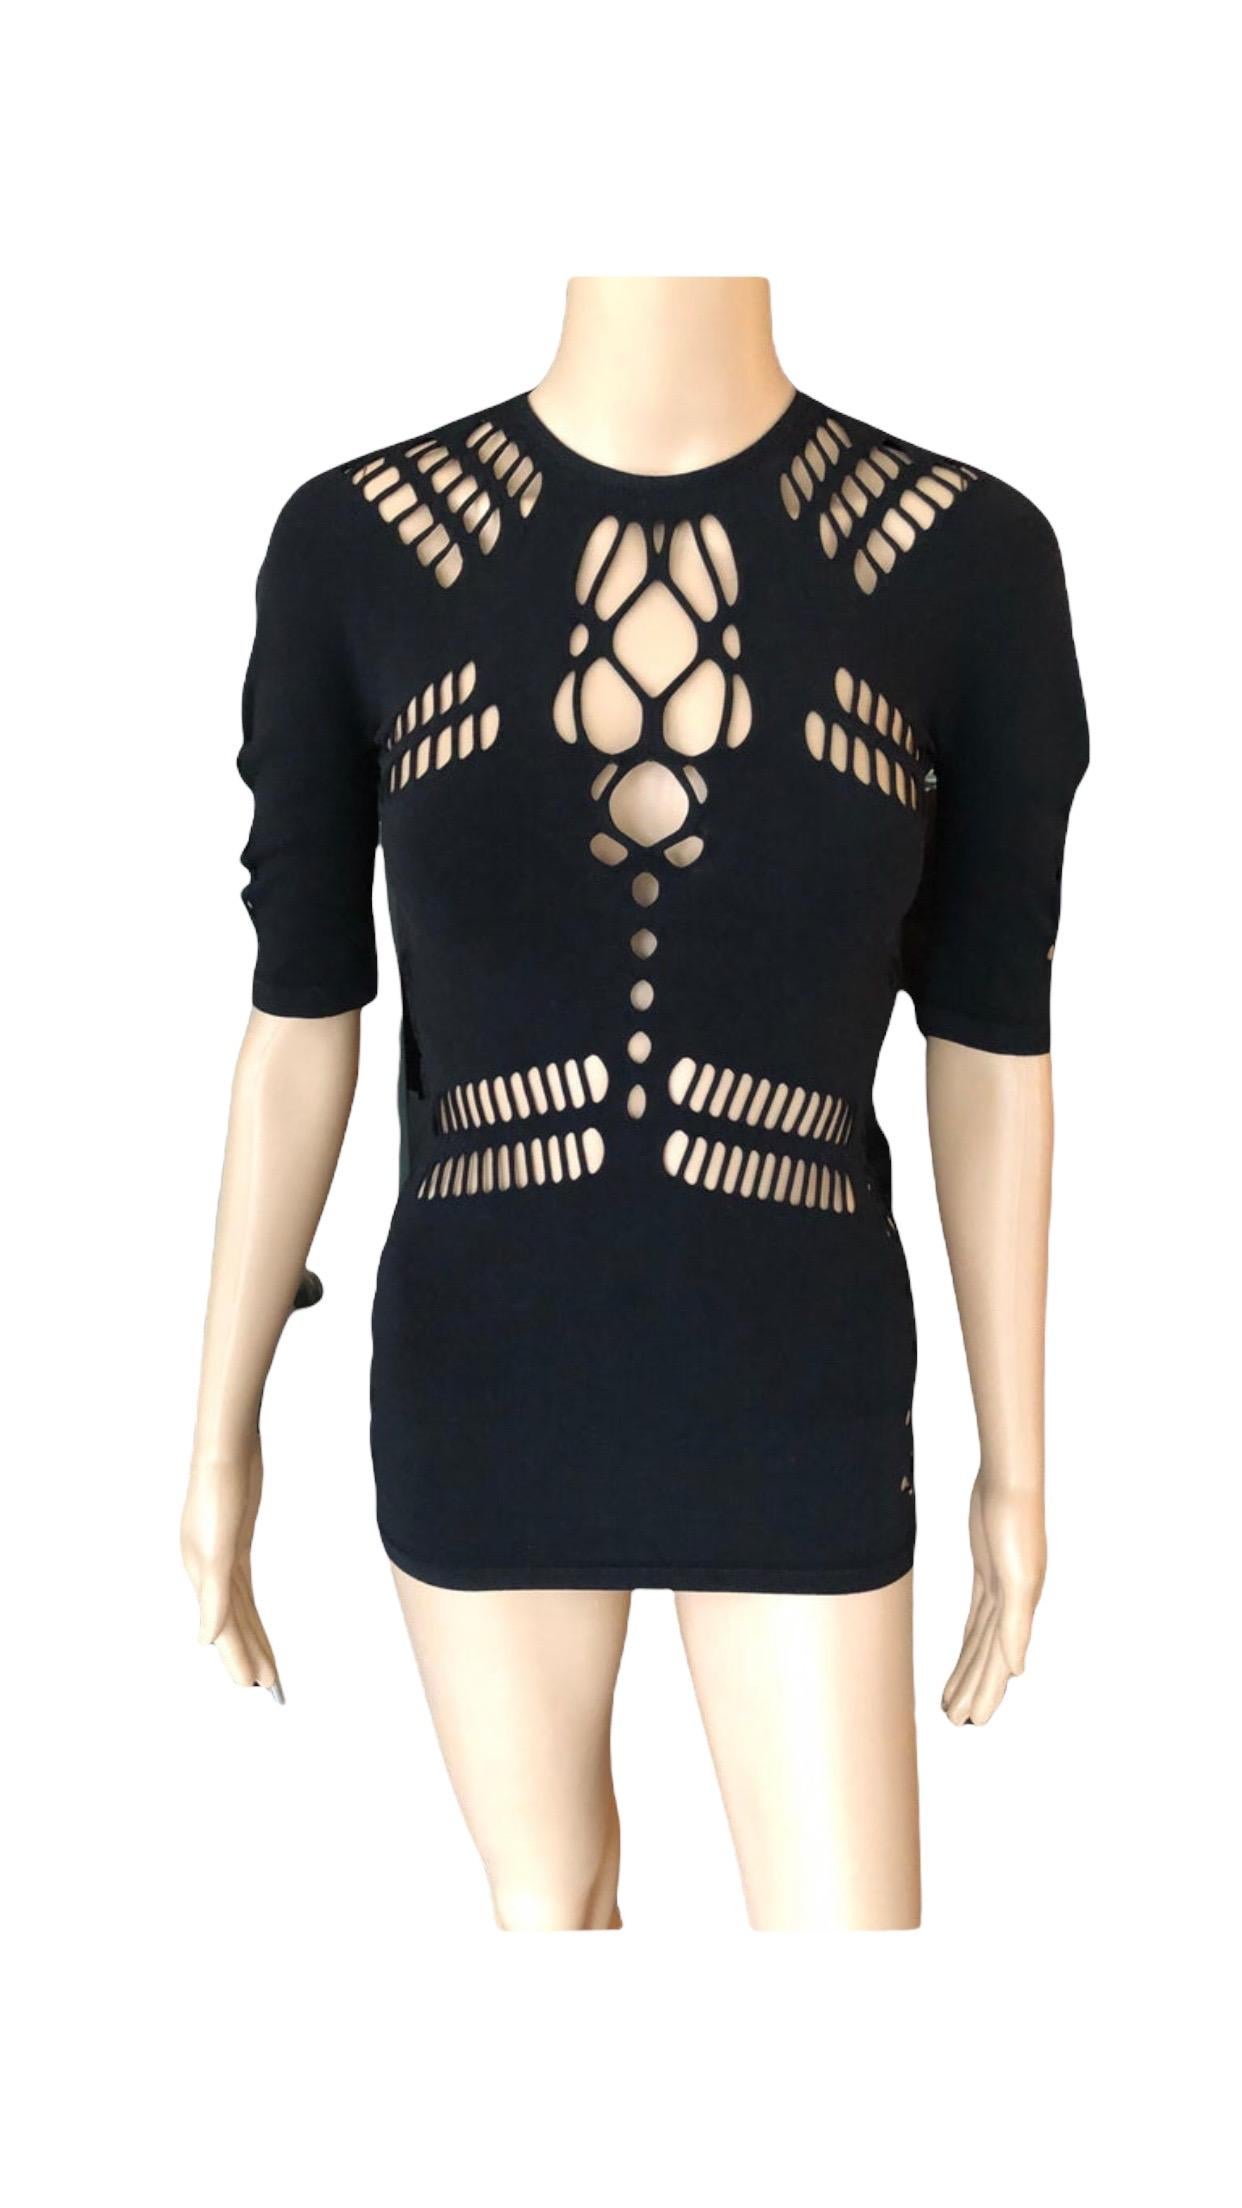 Gucci Cutout Fishnet Mesh Black Top In Good Condition For Sale In Naples, FL